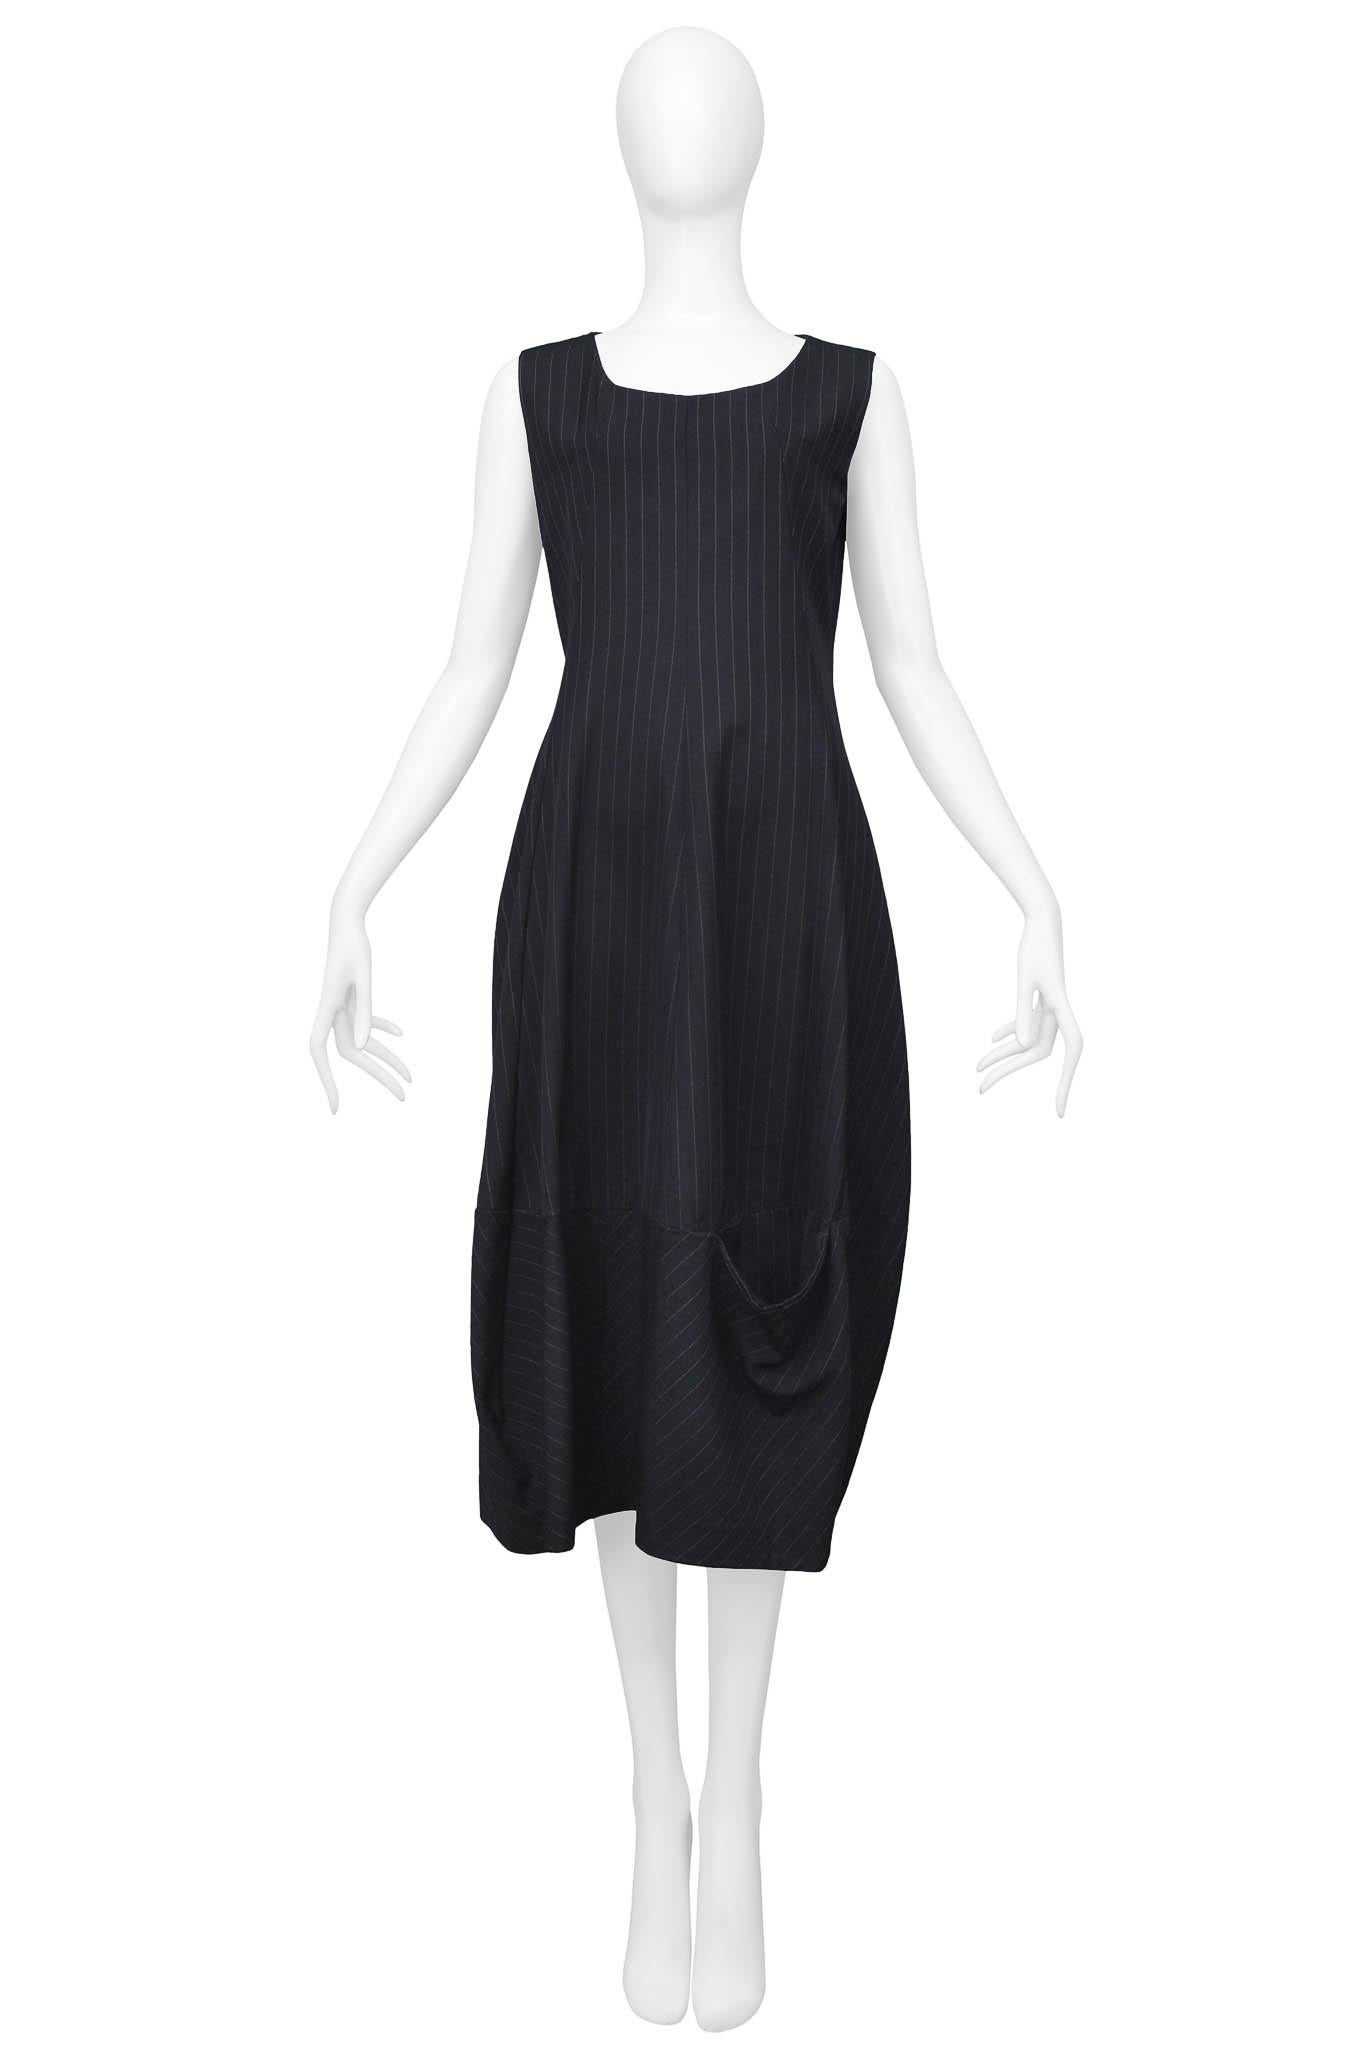 Resurrection Vintage is excited to offer a vintage Comme des Garcons black pinstripe dress featuring pockets on the front and back bottom hem, back zipper, and asymmetrical shaping along the skirt hem.

Comme Des Garcons
Size: Small
Fabric: 100%